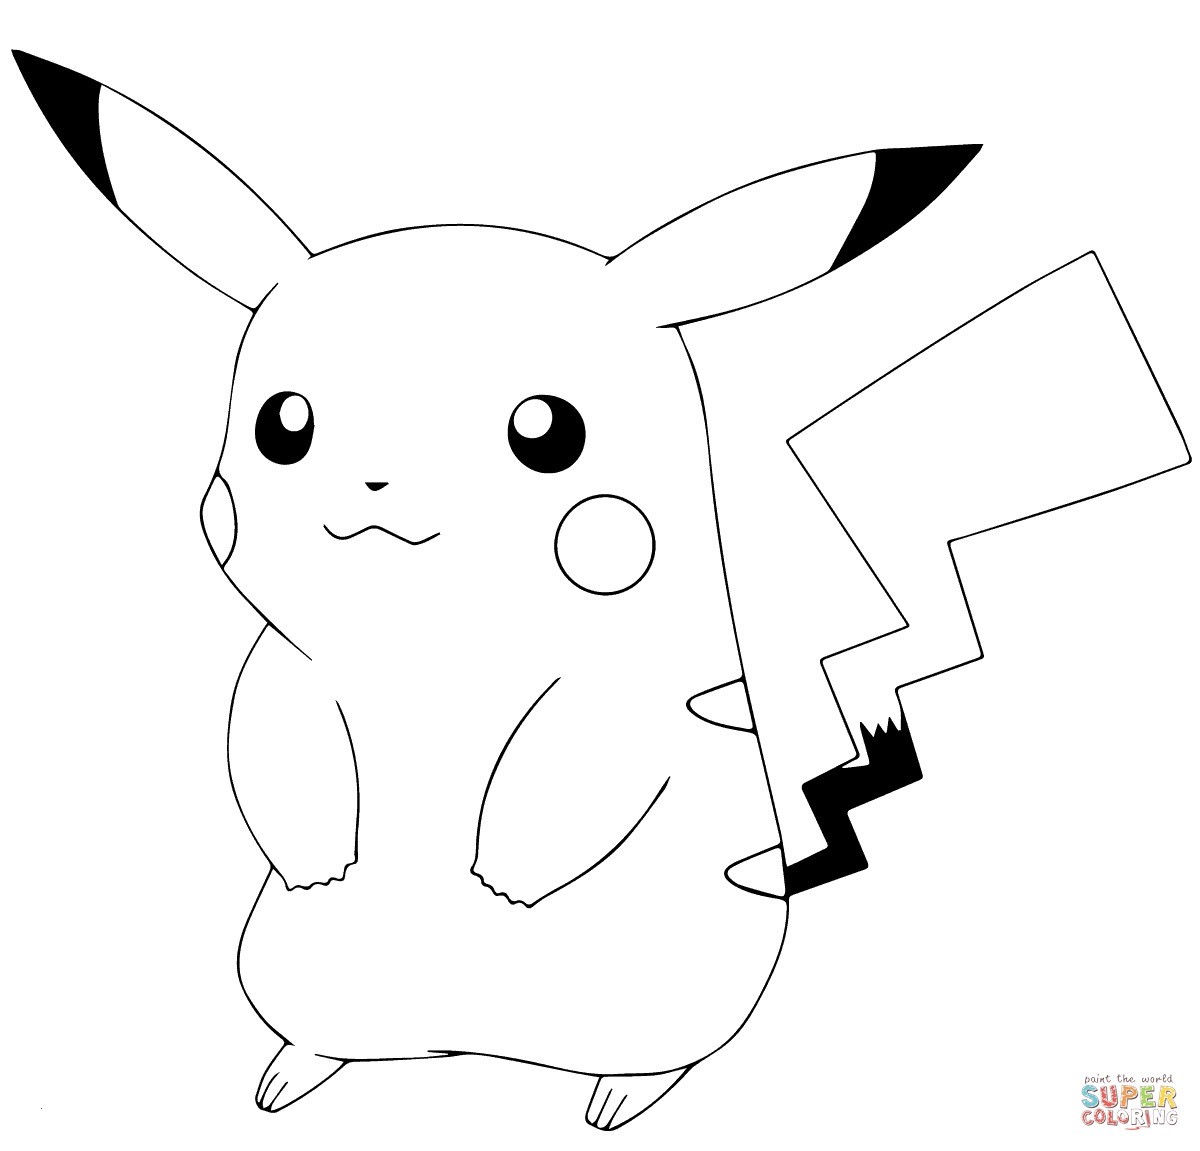 Pikachu Coloring Pages Lovely Pikachu Coloring Pages Lovely Fresh Charmander Pokemon Coloring